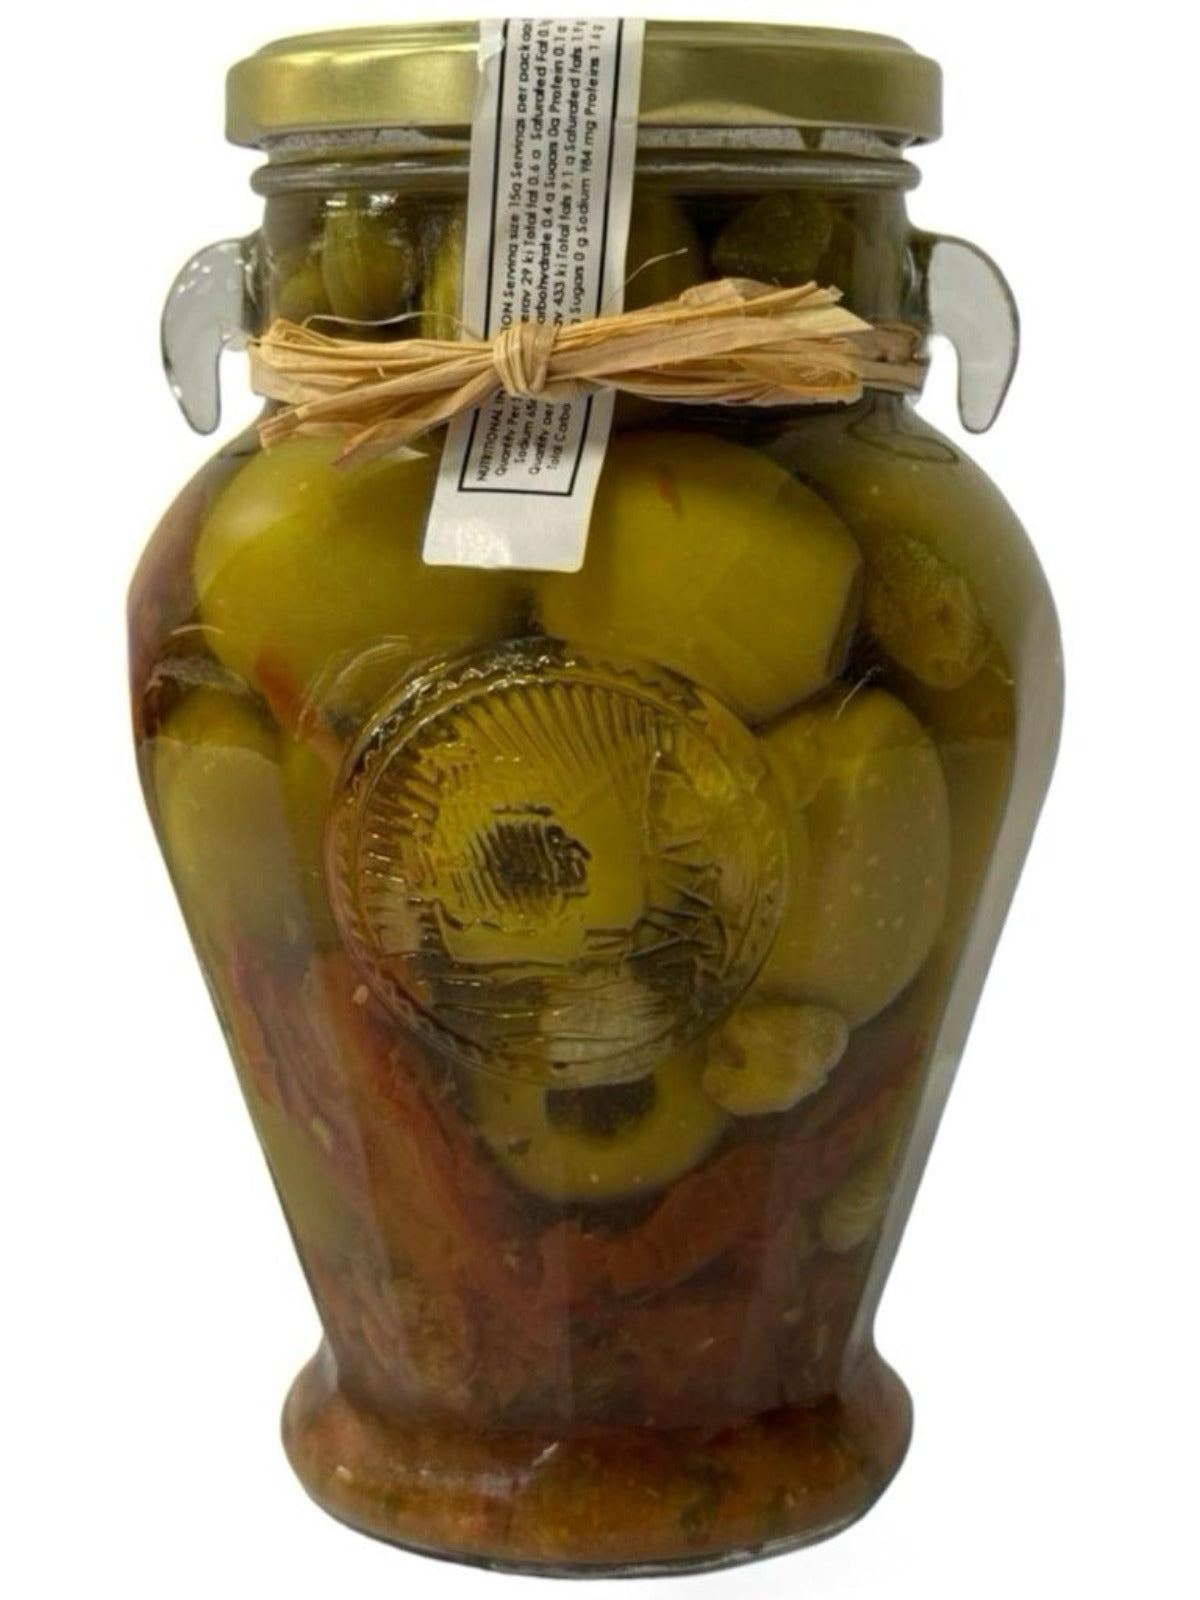 Torremar Spanish Pitted Queen Olives La Abuela Tomato Recipe 580g Best Before April 2027